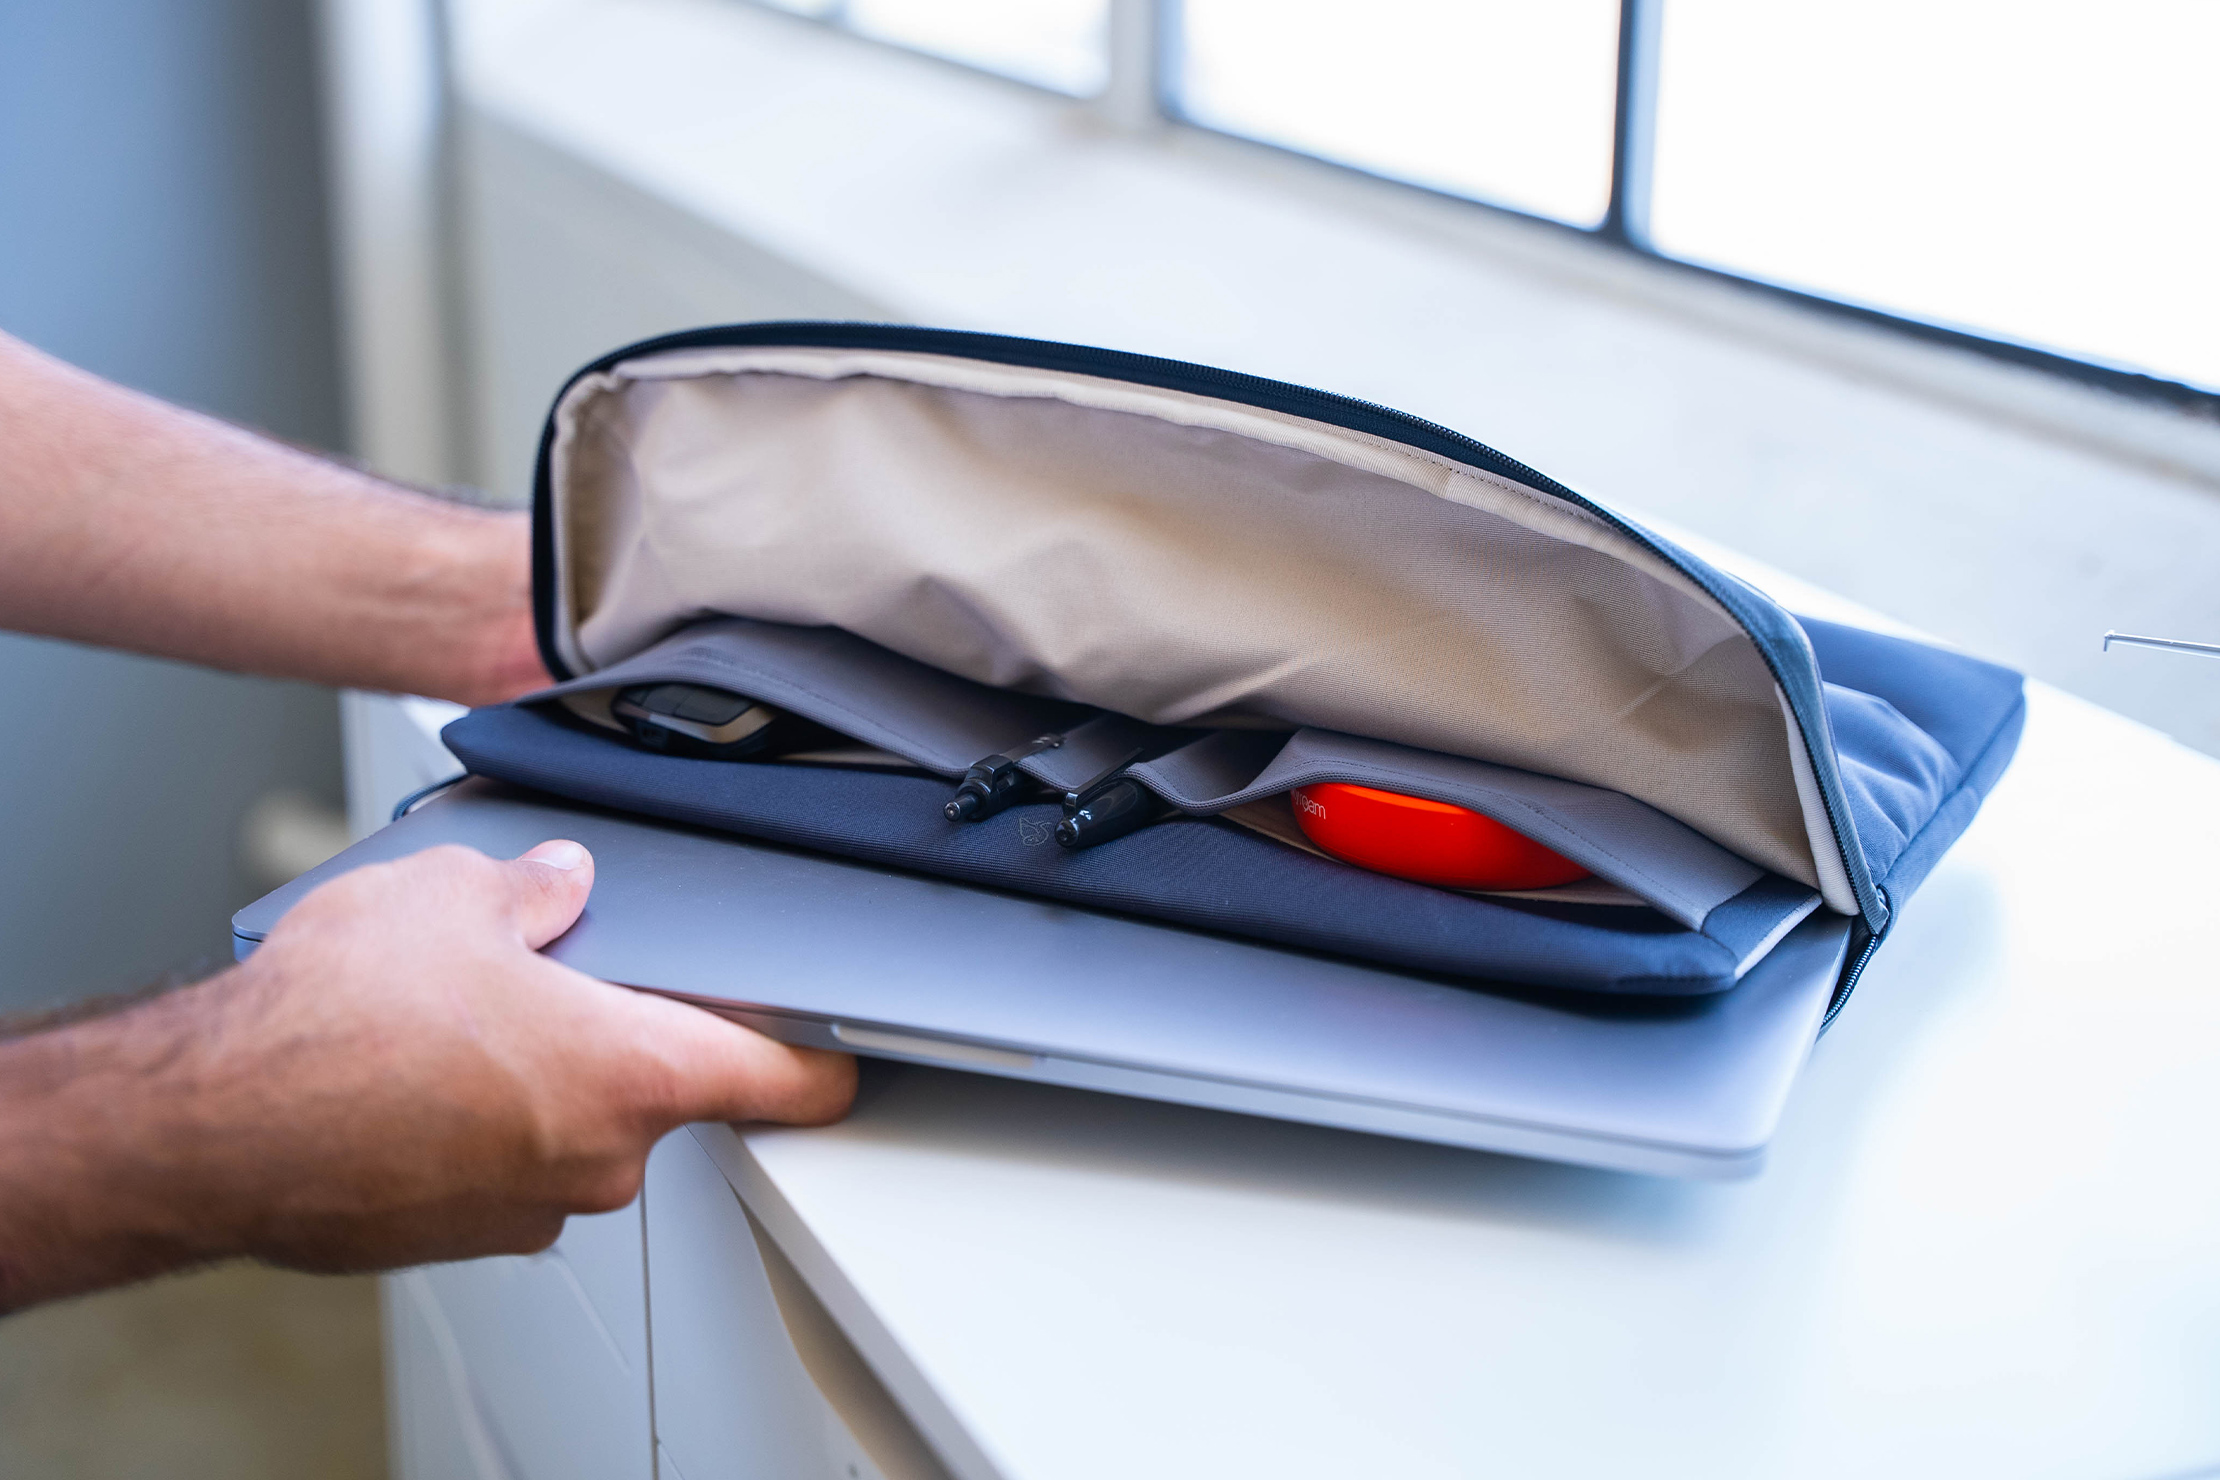 Bellroy Laptop Caddy In Use